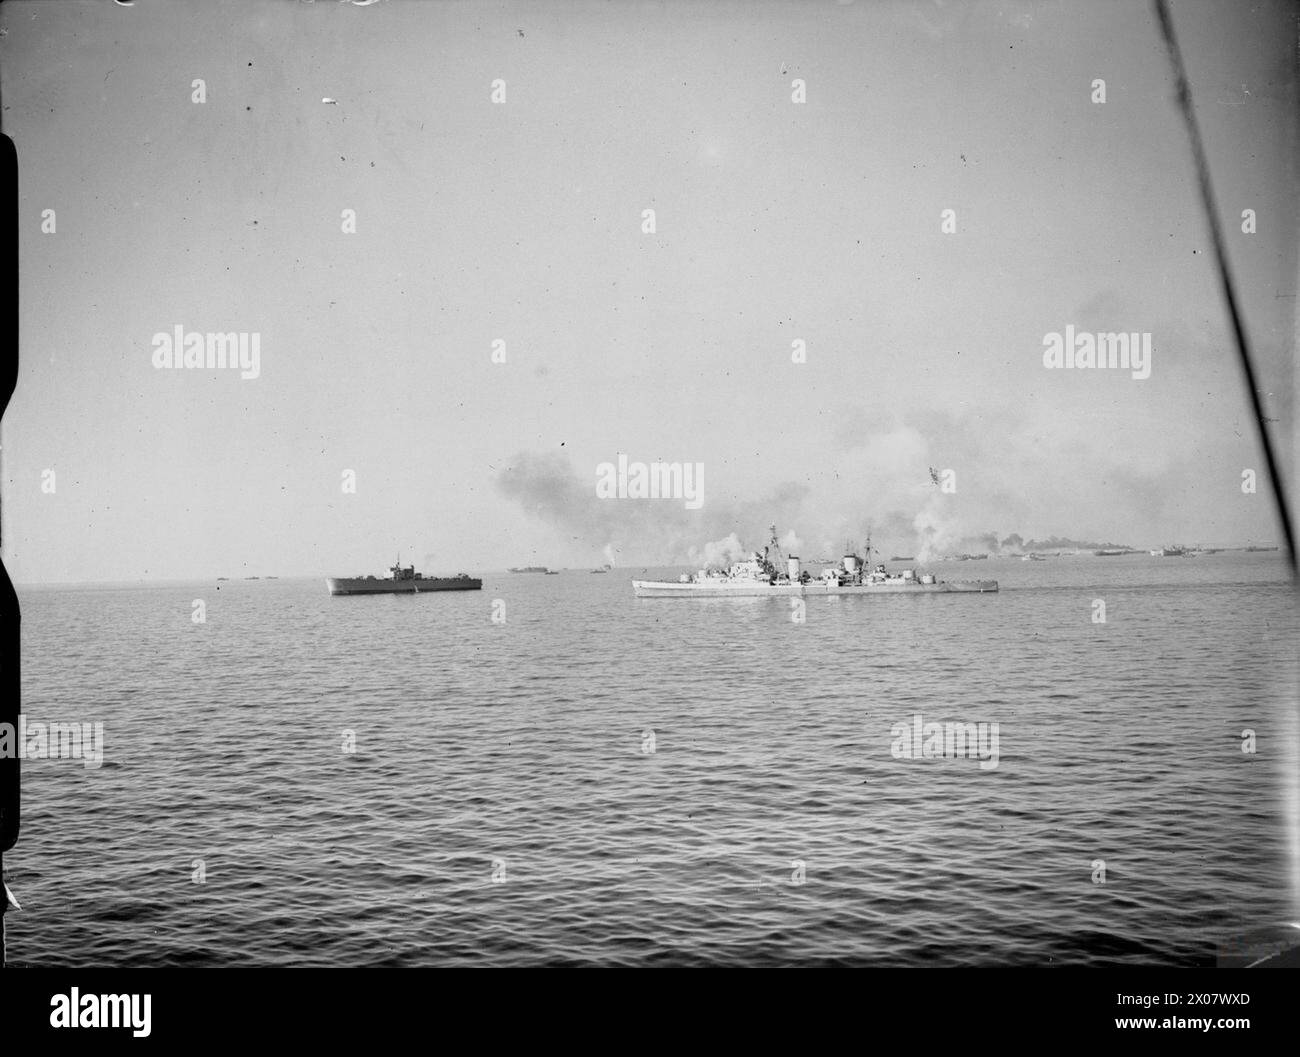 THE ROYAL NAVY DURING THE SECOND WORLD WAR - General view from on board the cruiser ORION of the invasion craft of the Fifth Army waiting their turn to proceed to the beaches at Anzio in the opening stages in the battle for Rome. HMS SPARTAN can be seen in the middle distance assisting with the bombardment  Royal Navy, SPARTAN (HMS) Stock Photo